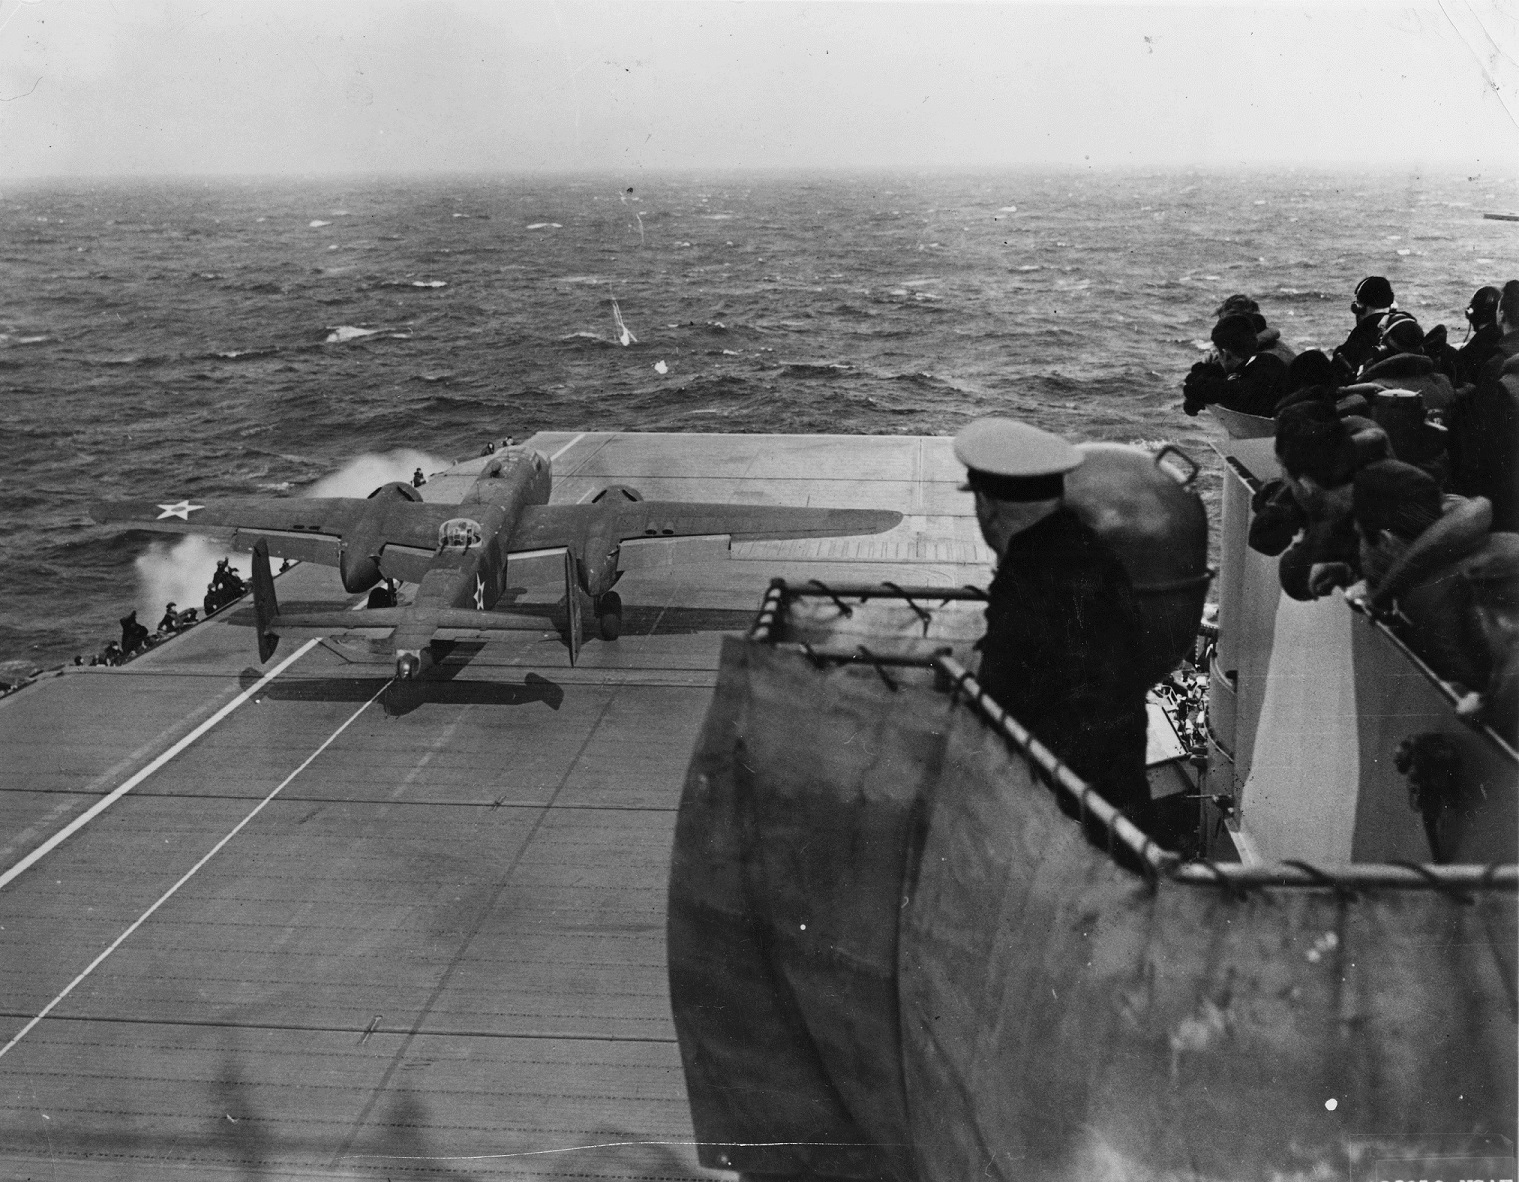 Admiral William H. Halsey watches a North American Aviation B-25B Mitchell medium bomber take off from USS Hornet (CV-8). The airplanes nose wheel has cleared the flight deck while the ship's bow pitches down in heavy seas. (U.S. Navy)